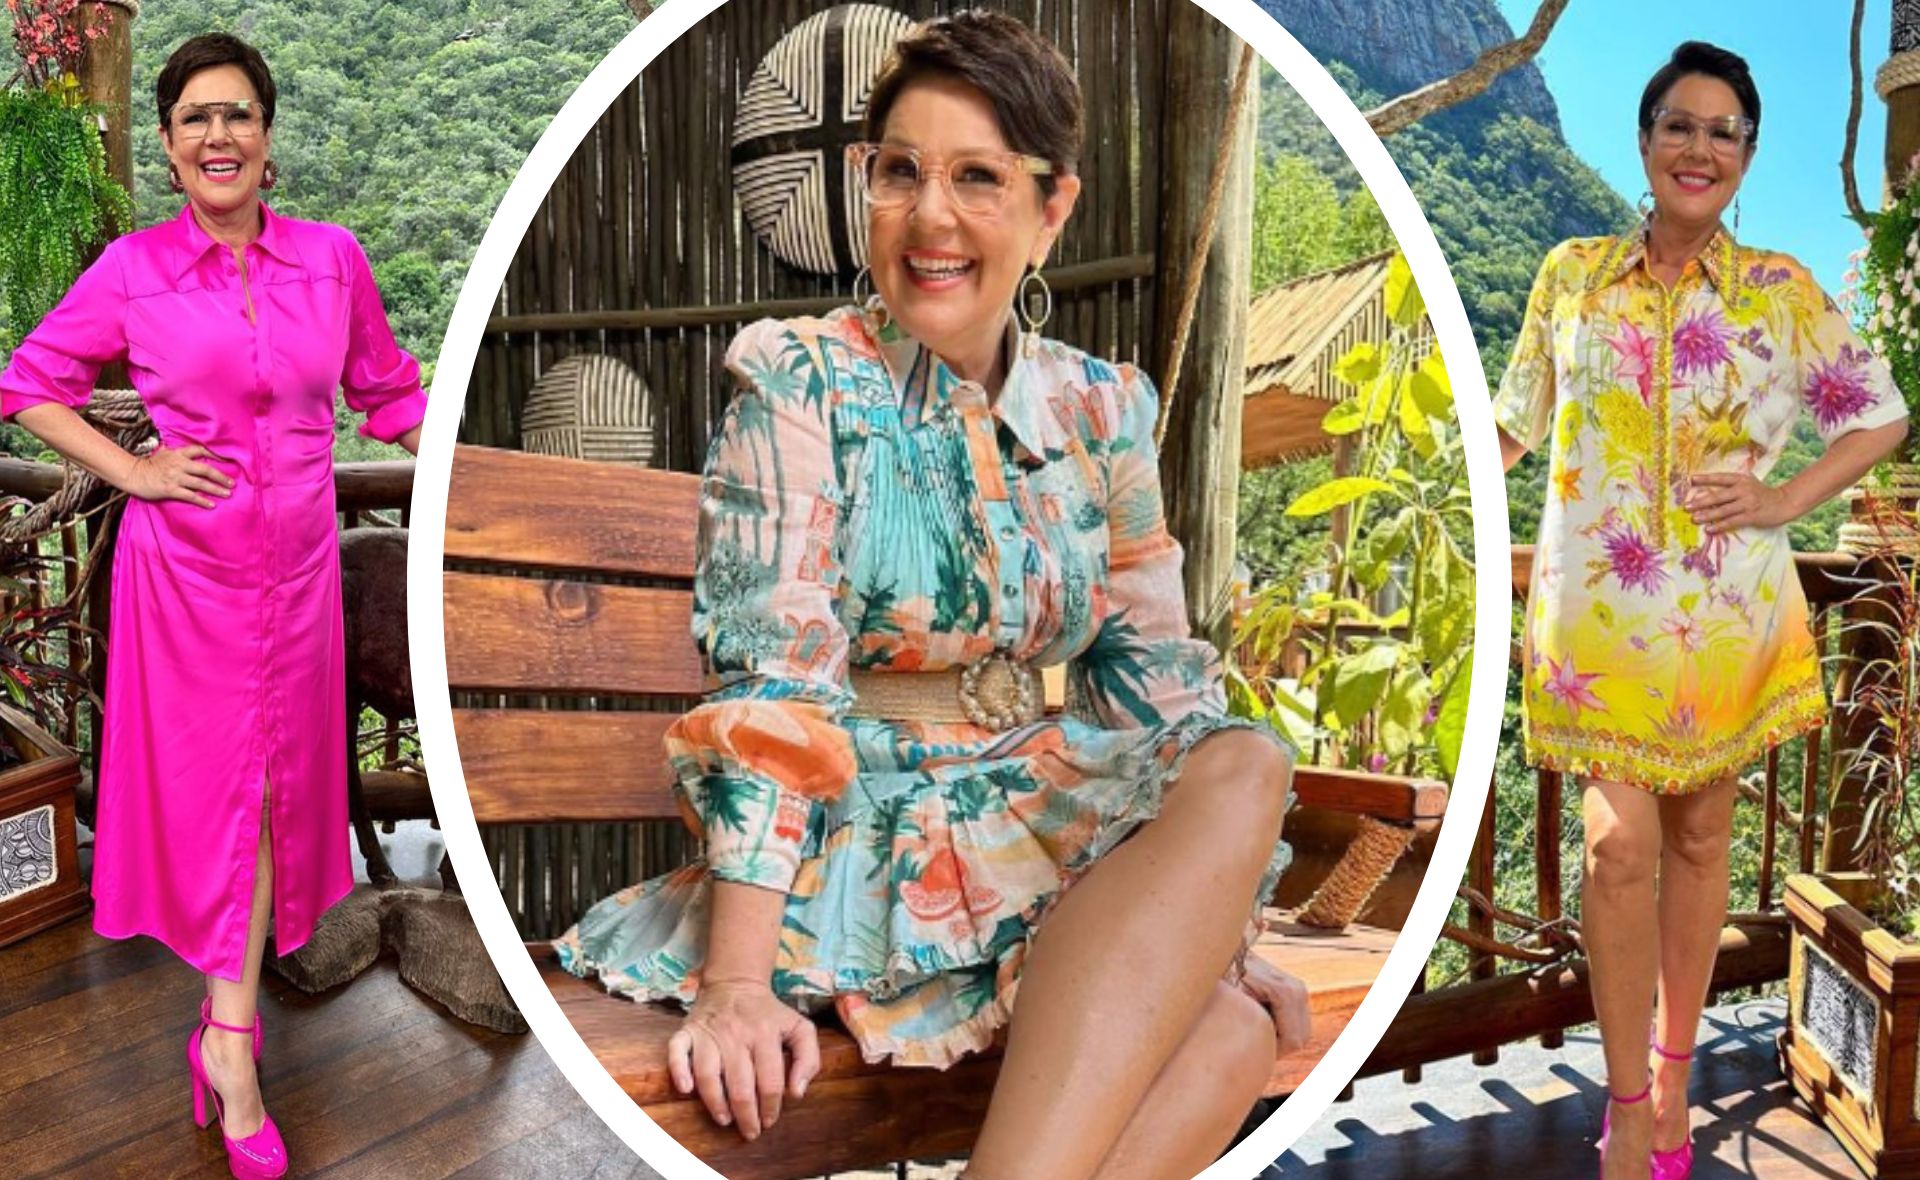 We’ve rounded up I’m a Celebrity… Get Me Out Of Here! host Julia Morris’ best fashion looks